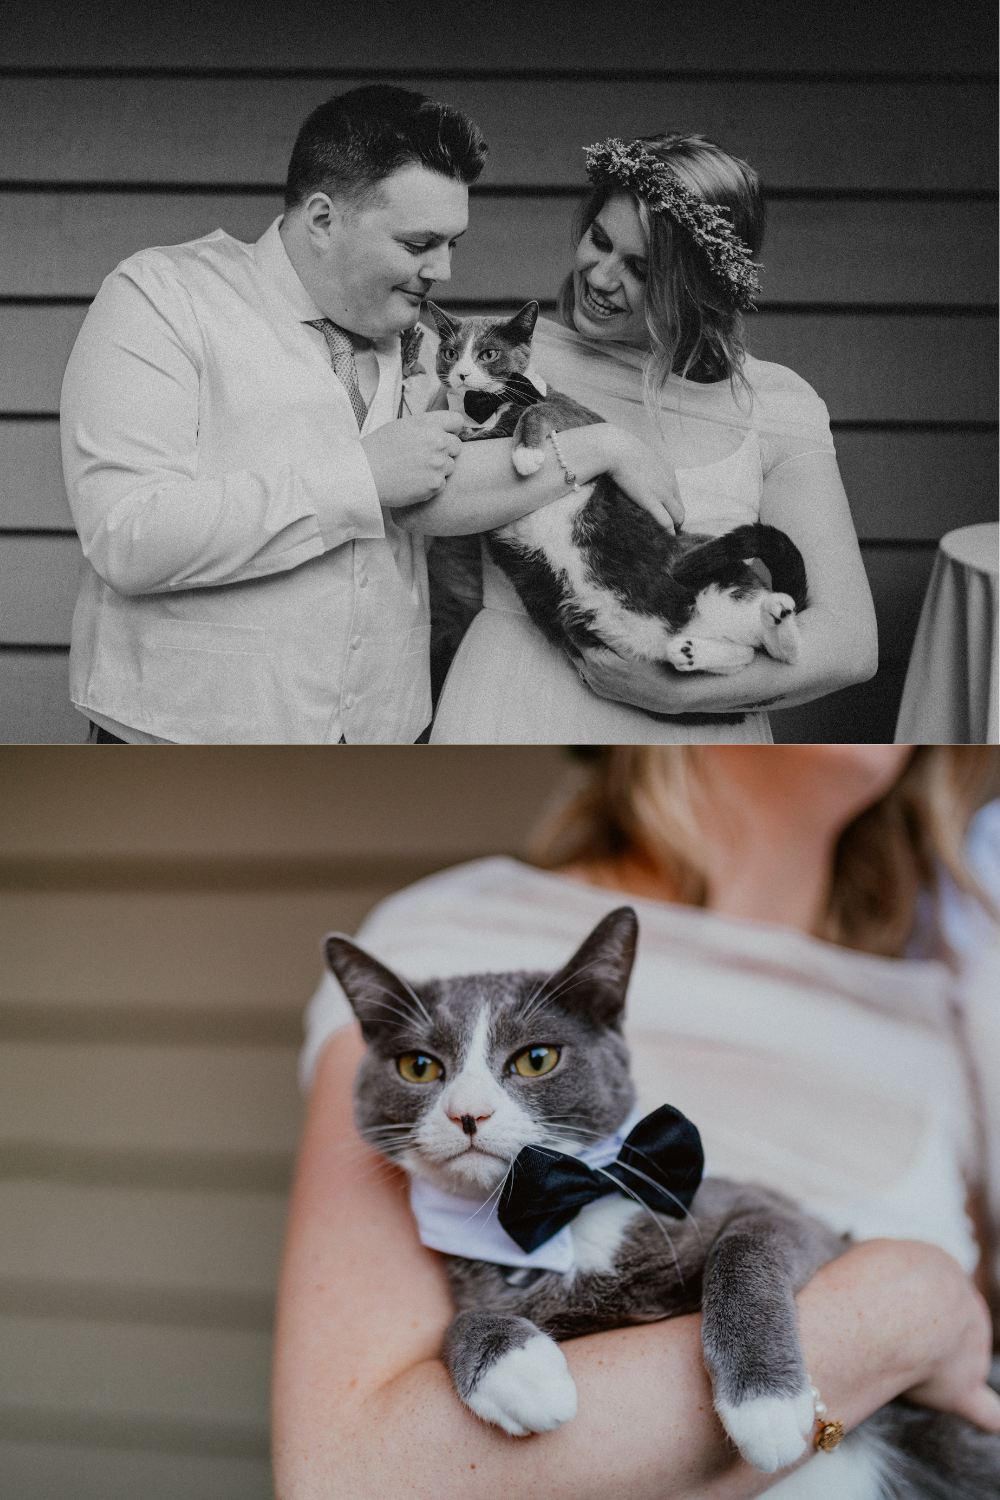 Bride and Groom pose with their cat in a bowtie after backyard wedding ceremony | Seattle Wedding Photographer, Seattle Elopement Photographer | chelseaabril.com